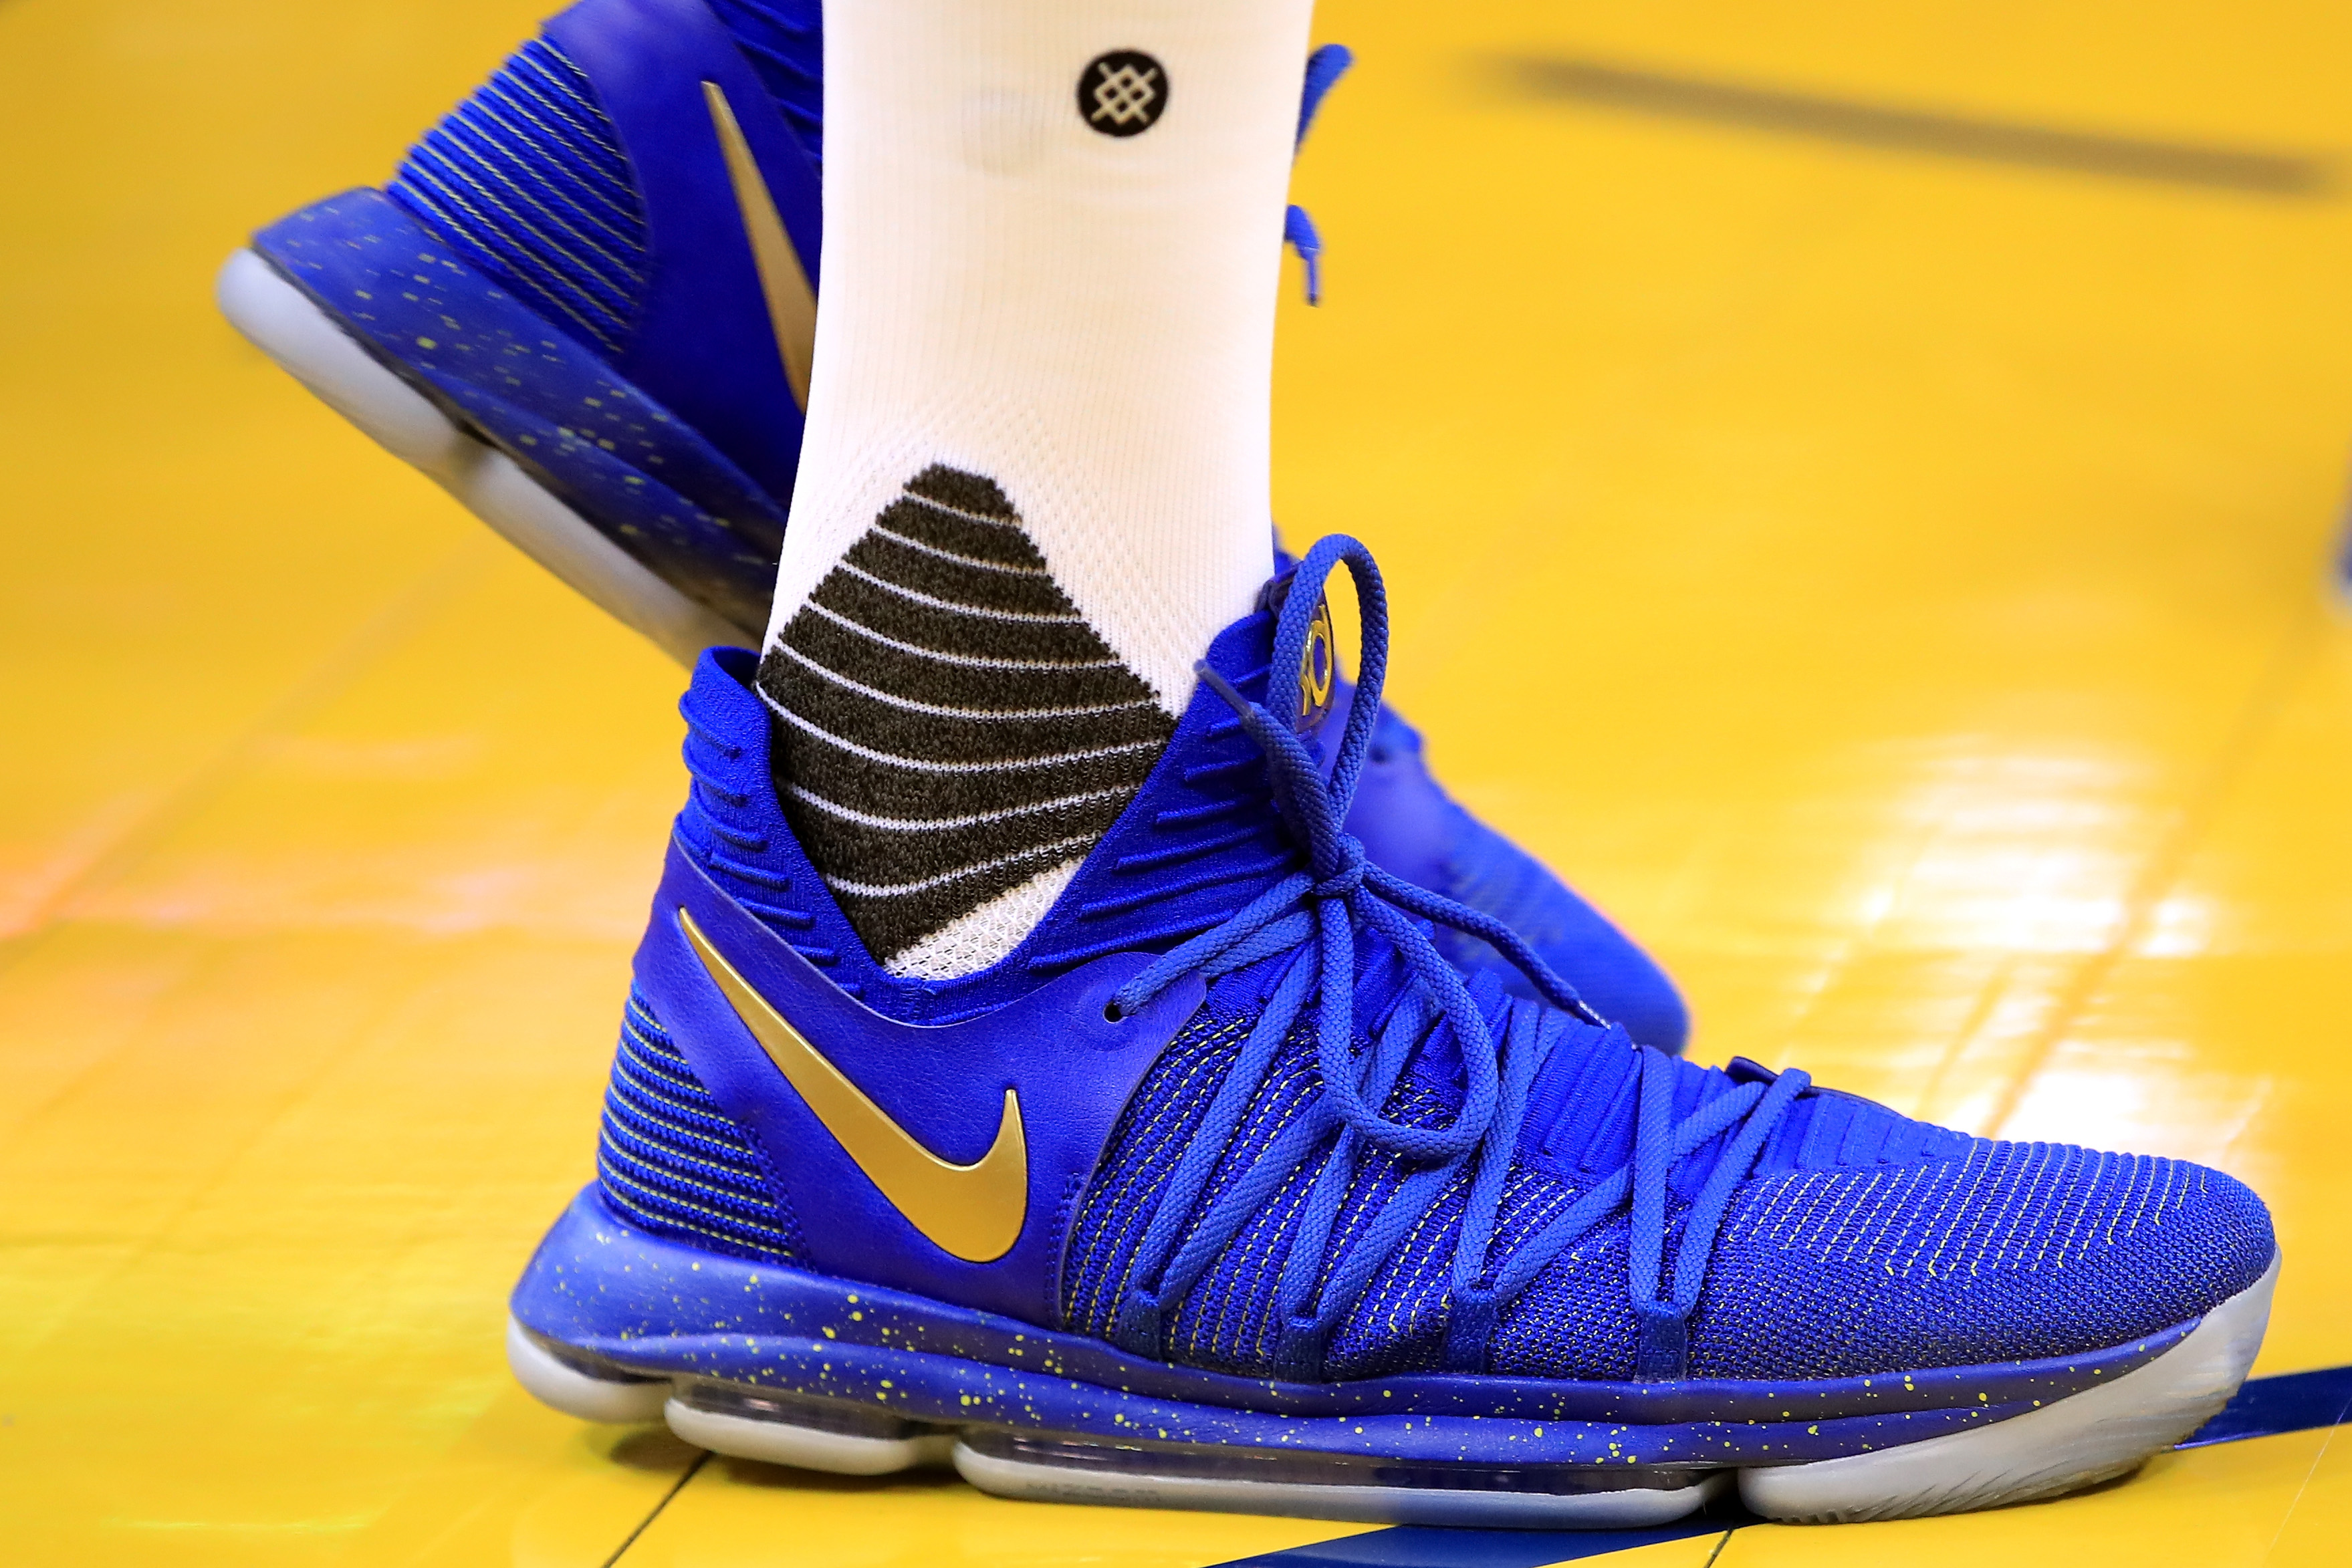 Kevin Durant Shoes New KD 10’s Launch During NBA Finals